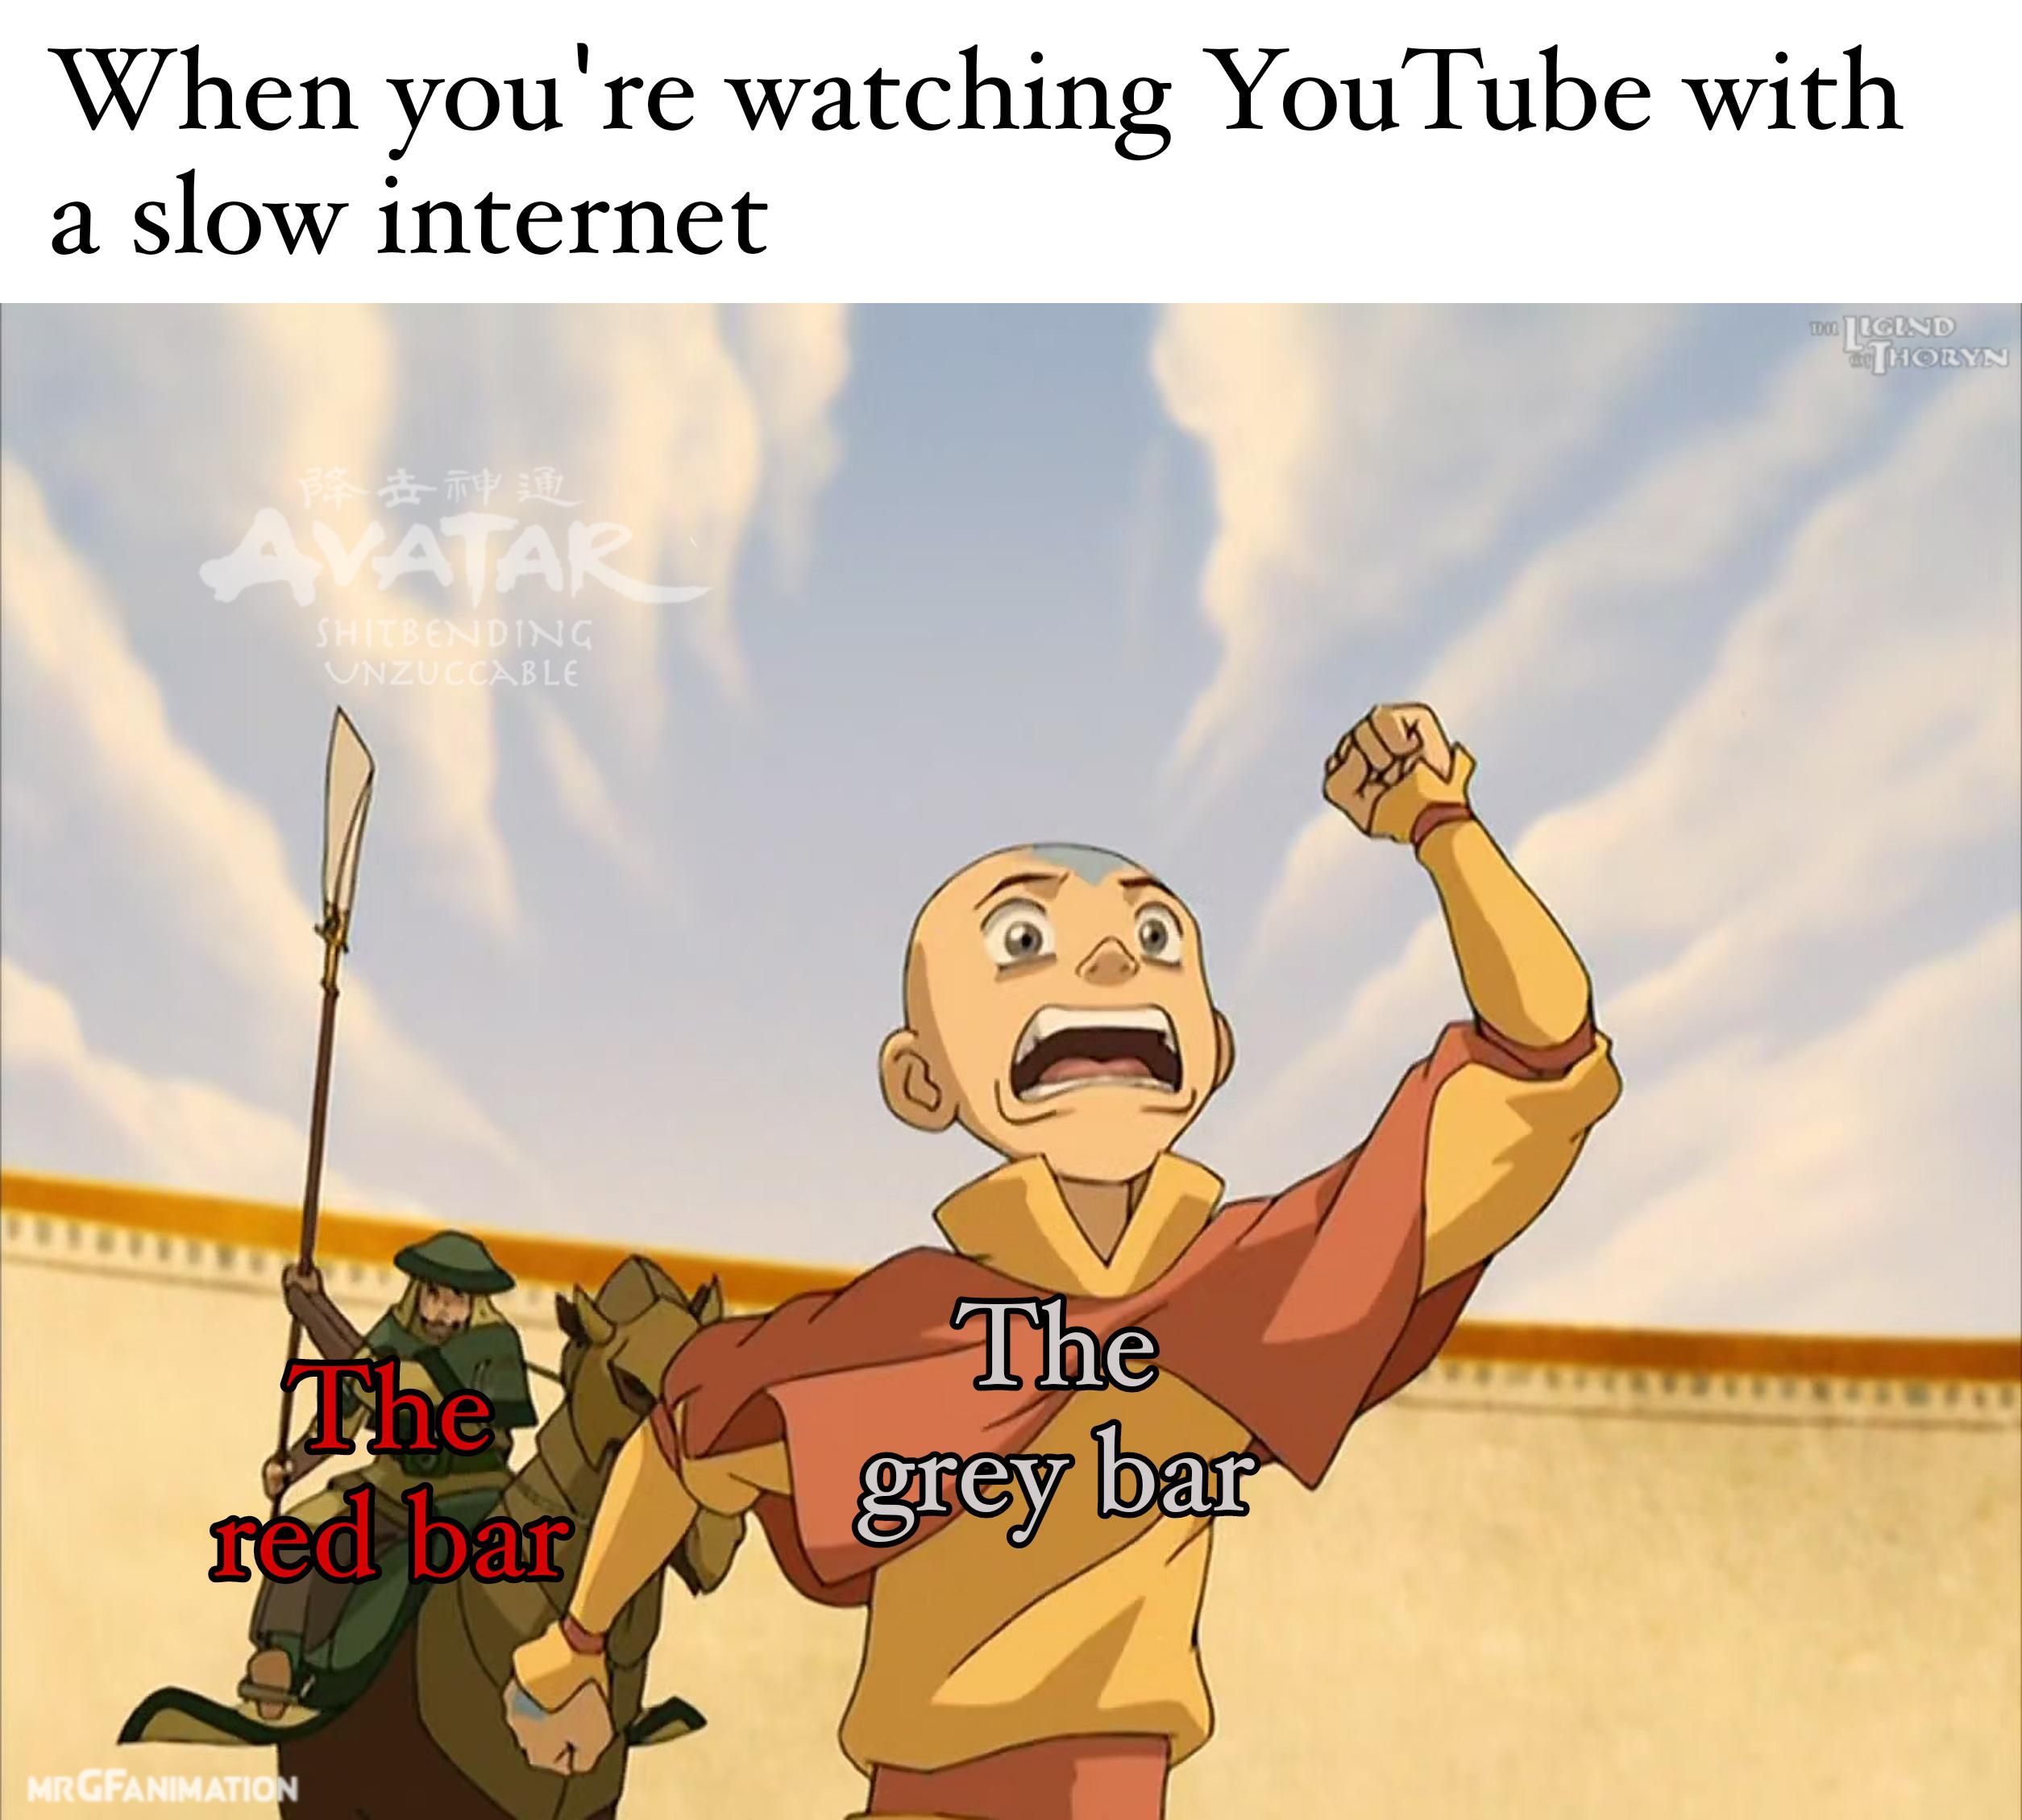 cartoon - When you're watching YouTube with a slow internet 1000 Lgend Thoryn Ft Avatar Shitbending Unzuccable The The red bar grey bar A Mrgfanimation